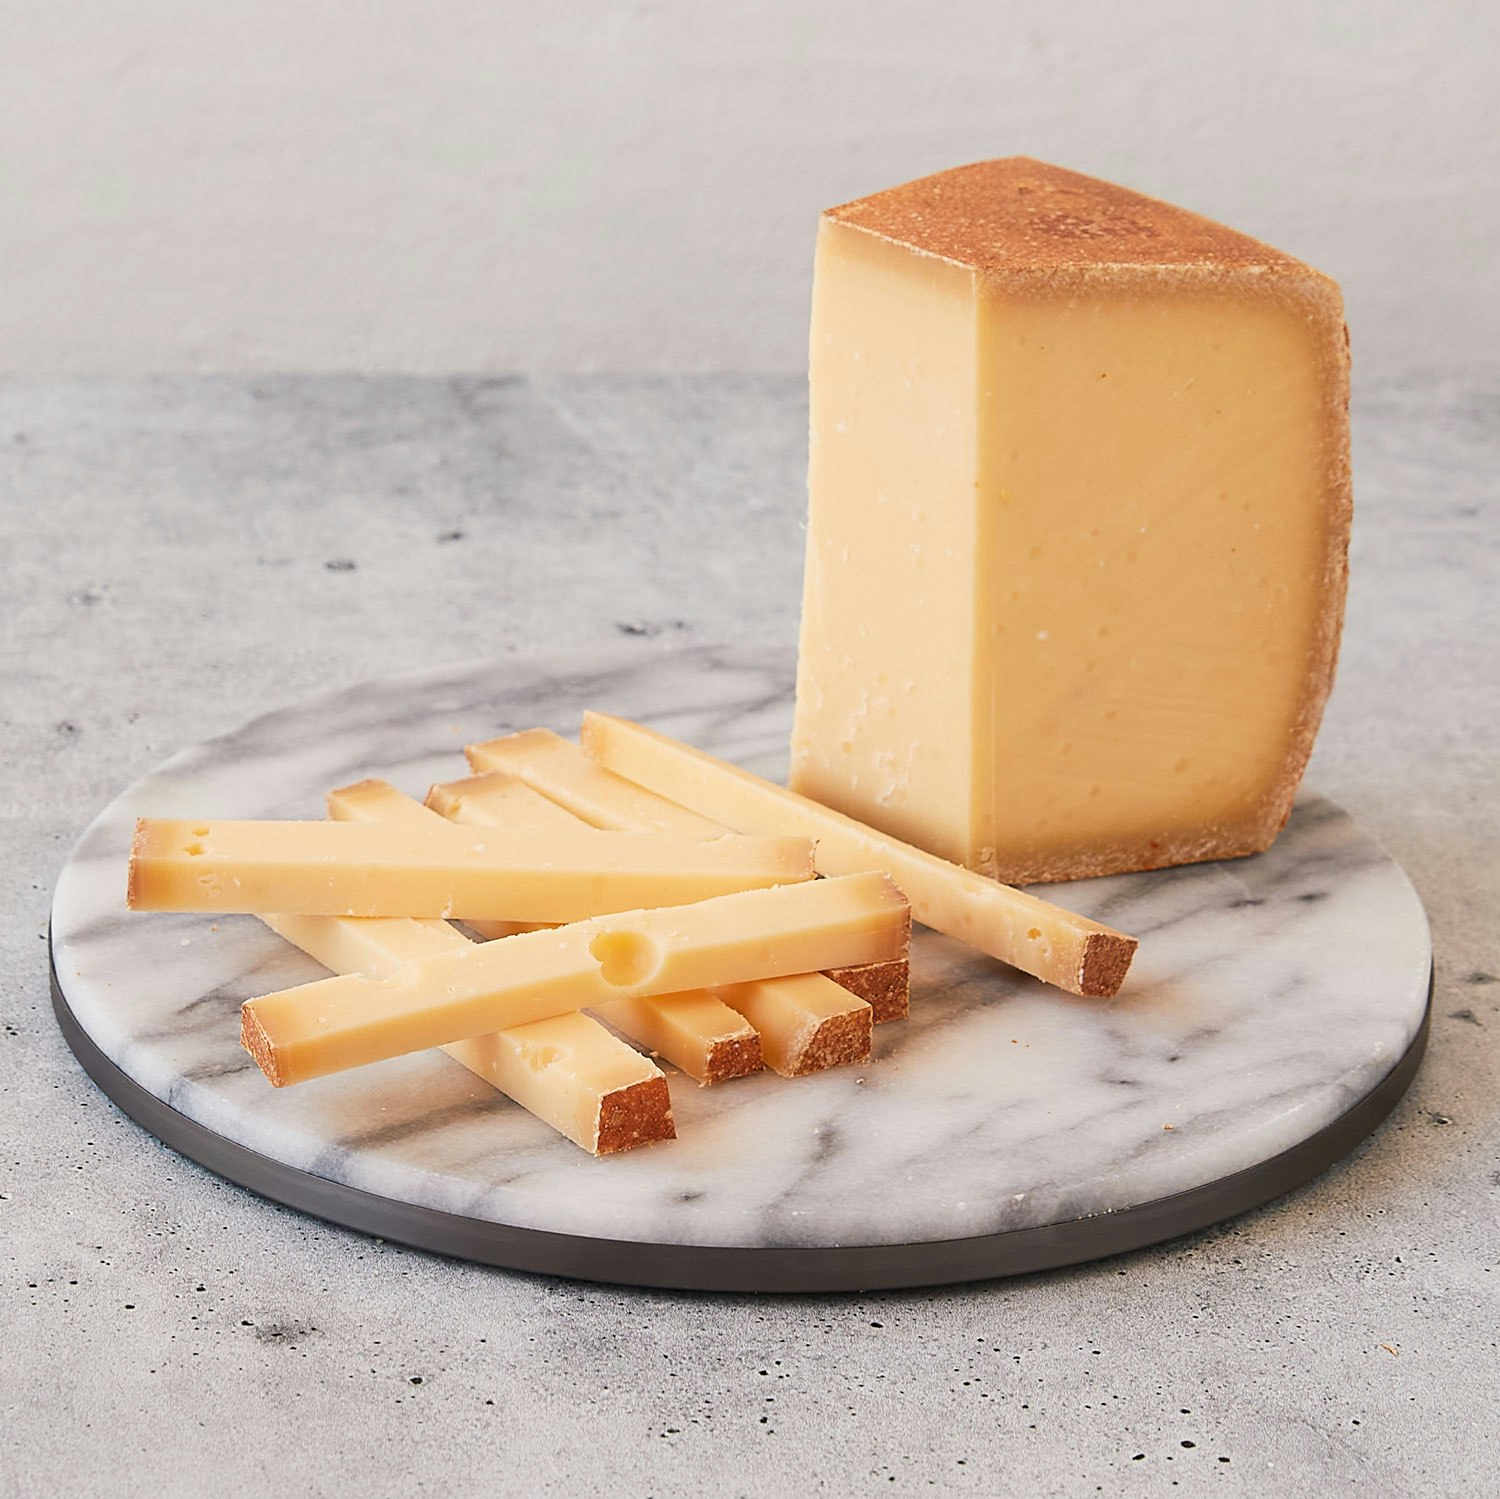 Murrays-Cave-Aged-Reserve-Annelies-cheese-9572-01